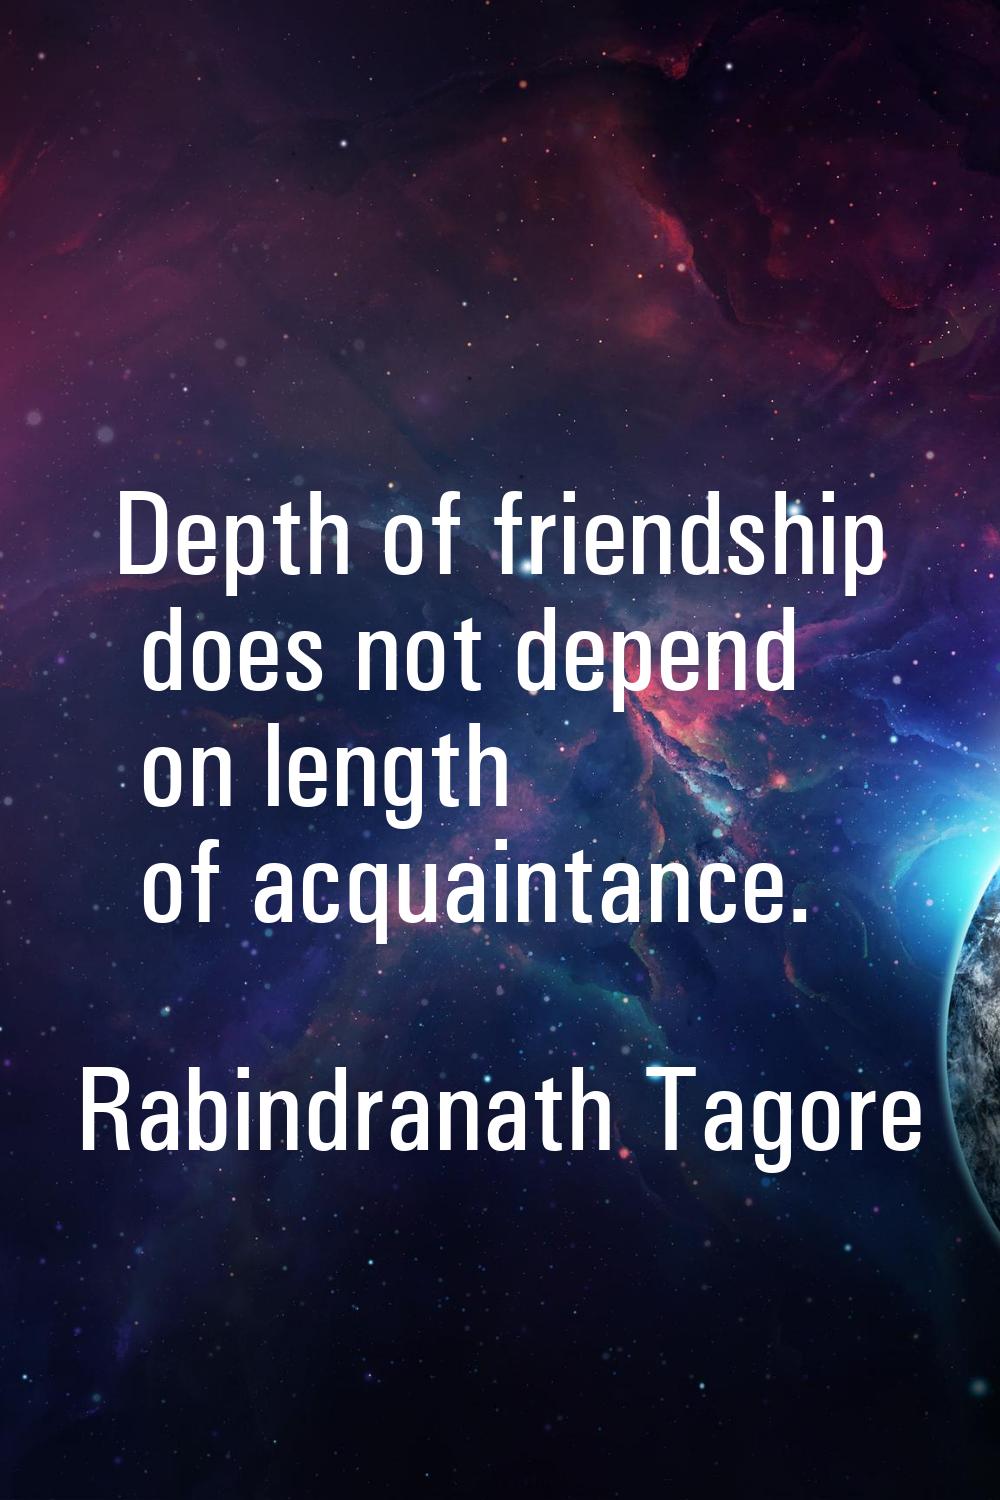 Depth of friendship does not depend on length of acquaintance.